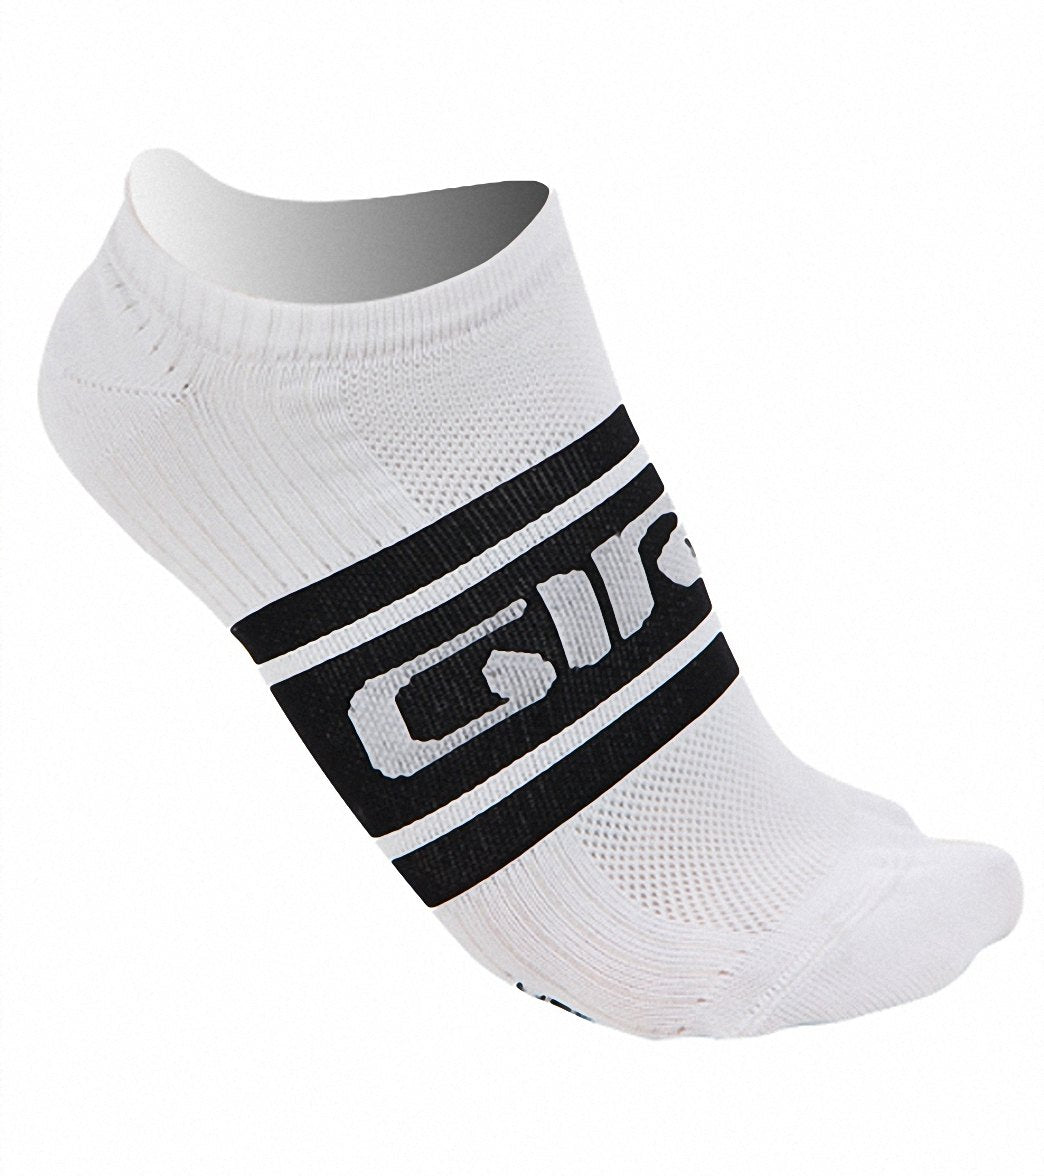 Giro Classic Racer Low Cycling Sock White/Black at SwimOutlet.com